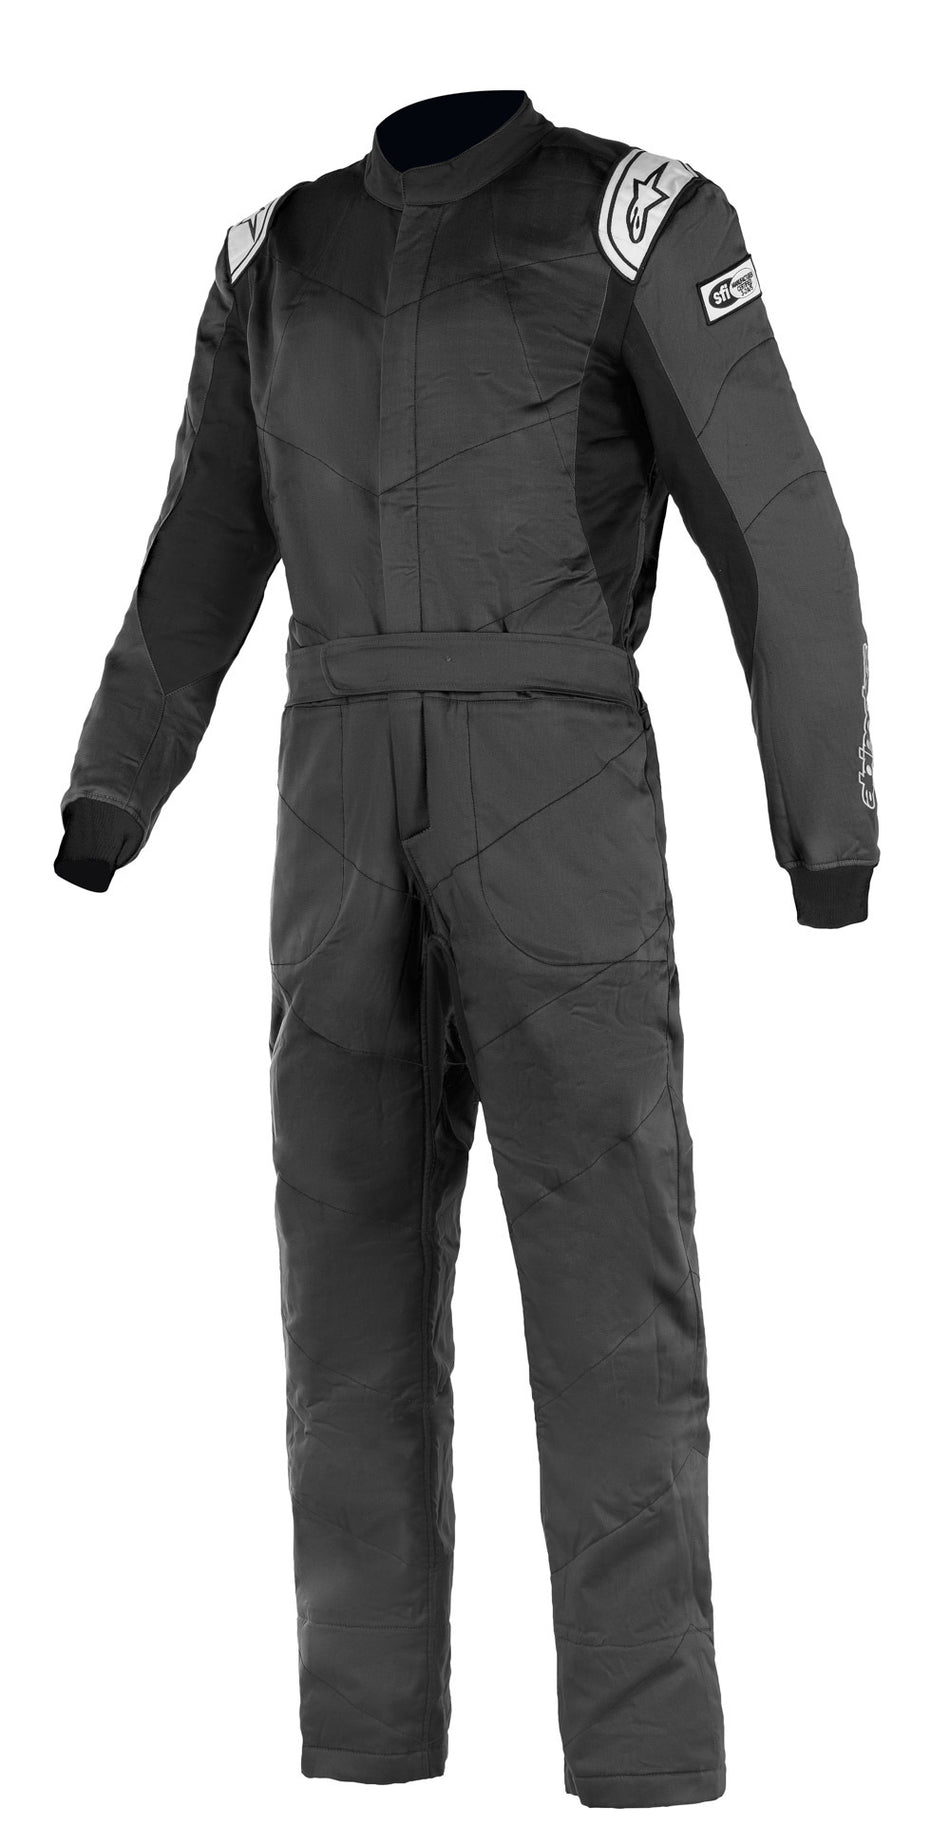 Driving Suit - Knoxville V2 - 1-Piece - SFI 3.2A/5 - Boot-Cut - Triple Layer - Fire Retardant Fabric - Black - Size 58 - Large / X-Large - Each